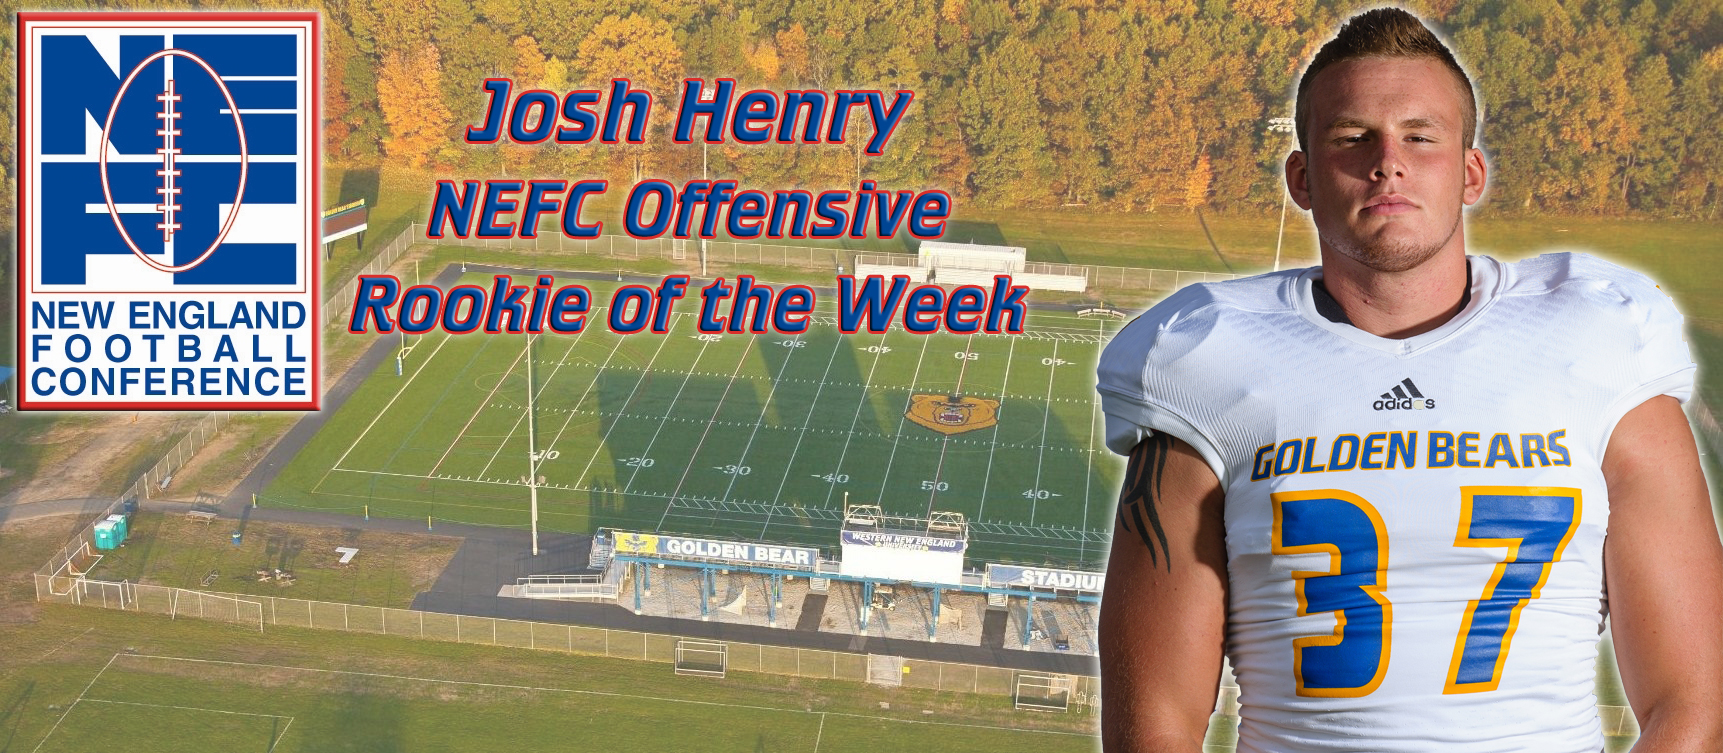 Josh Henry Named NEFC Offensive Rookie of the Week